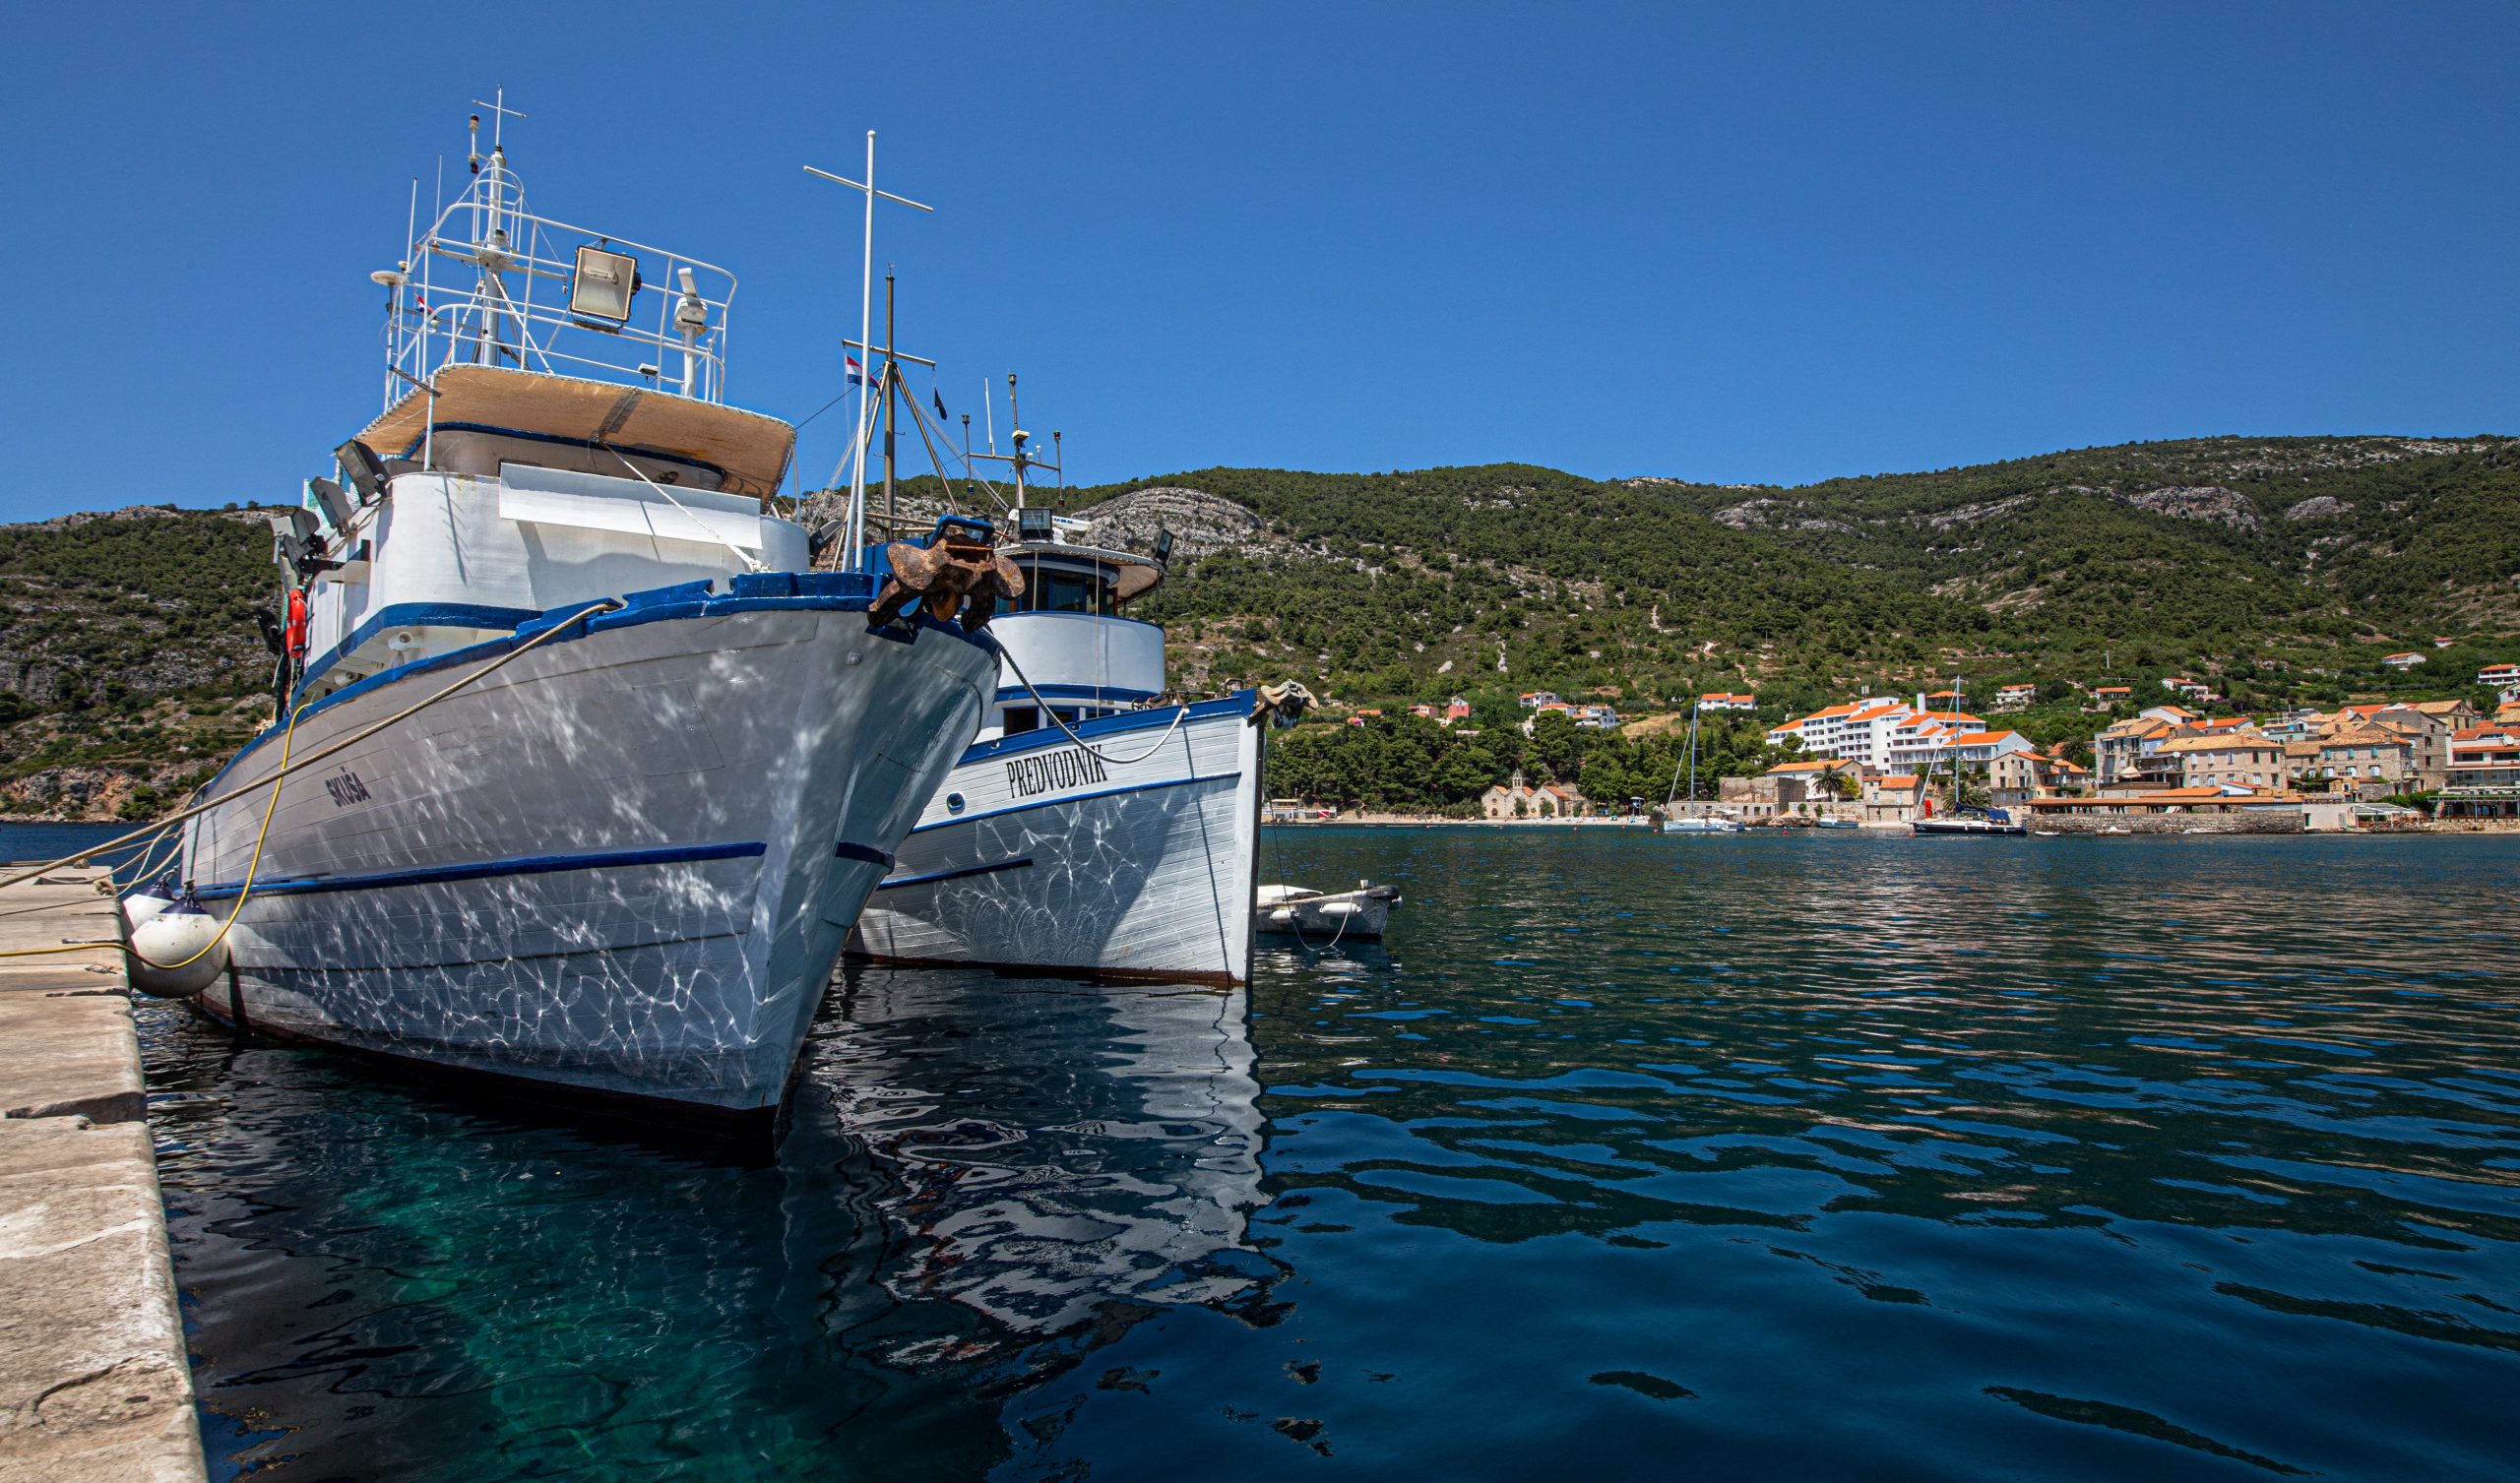 Harbour view of two boats docked at Vis, Croatia on a hot day.